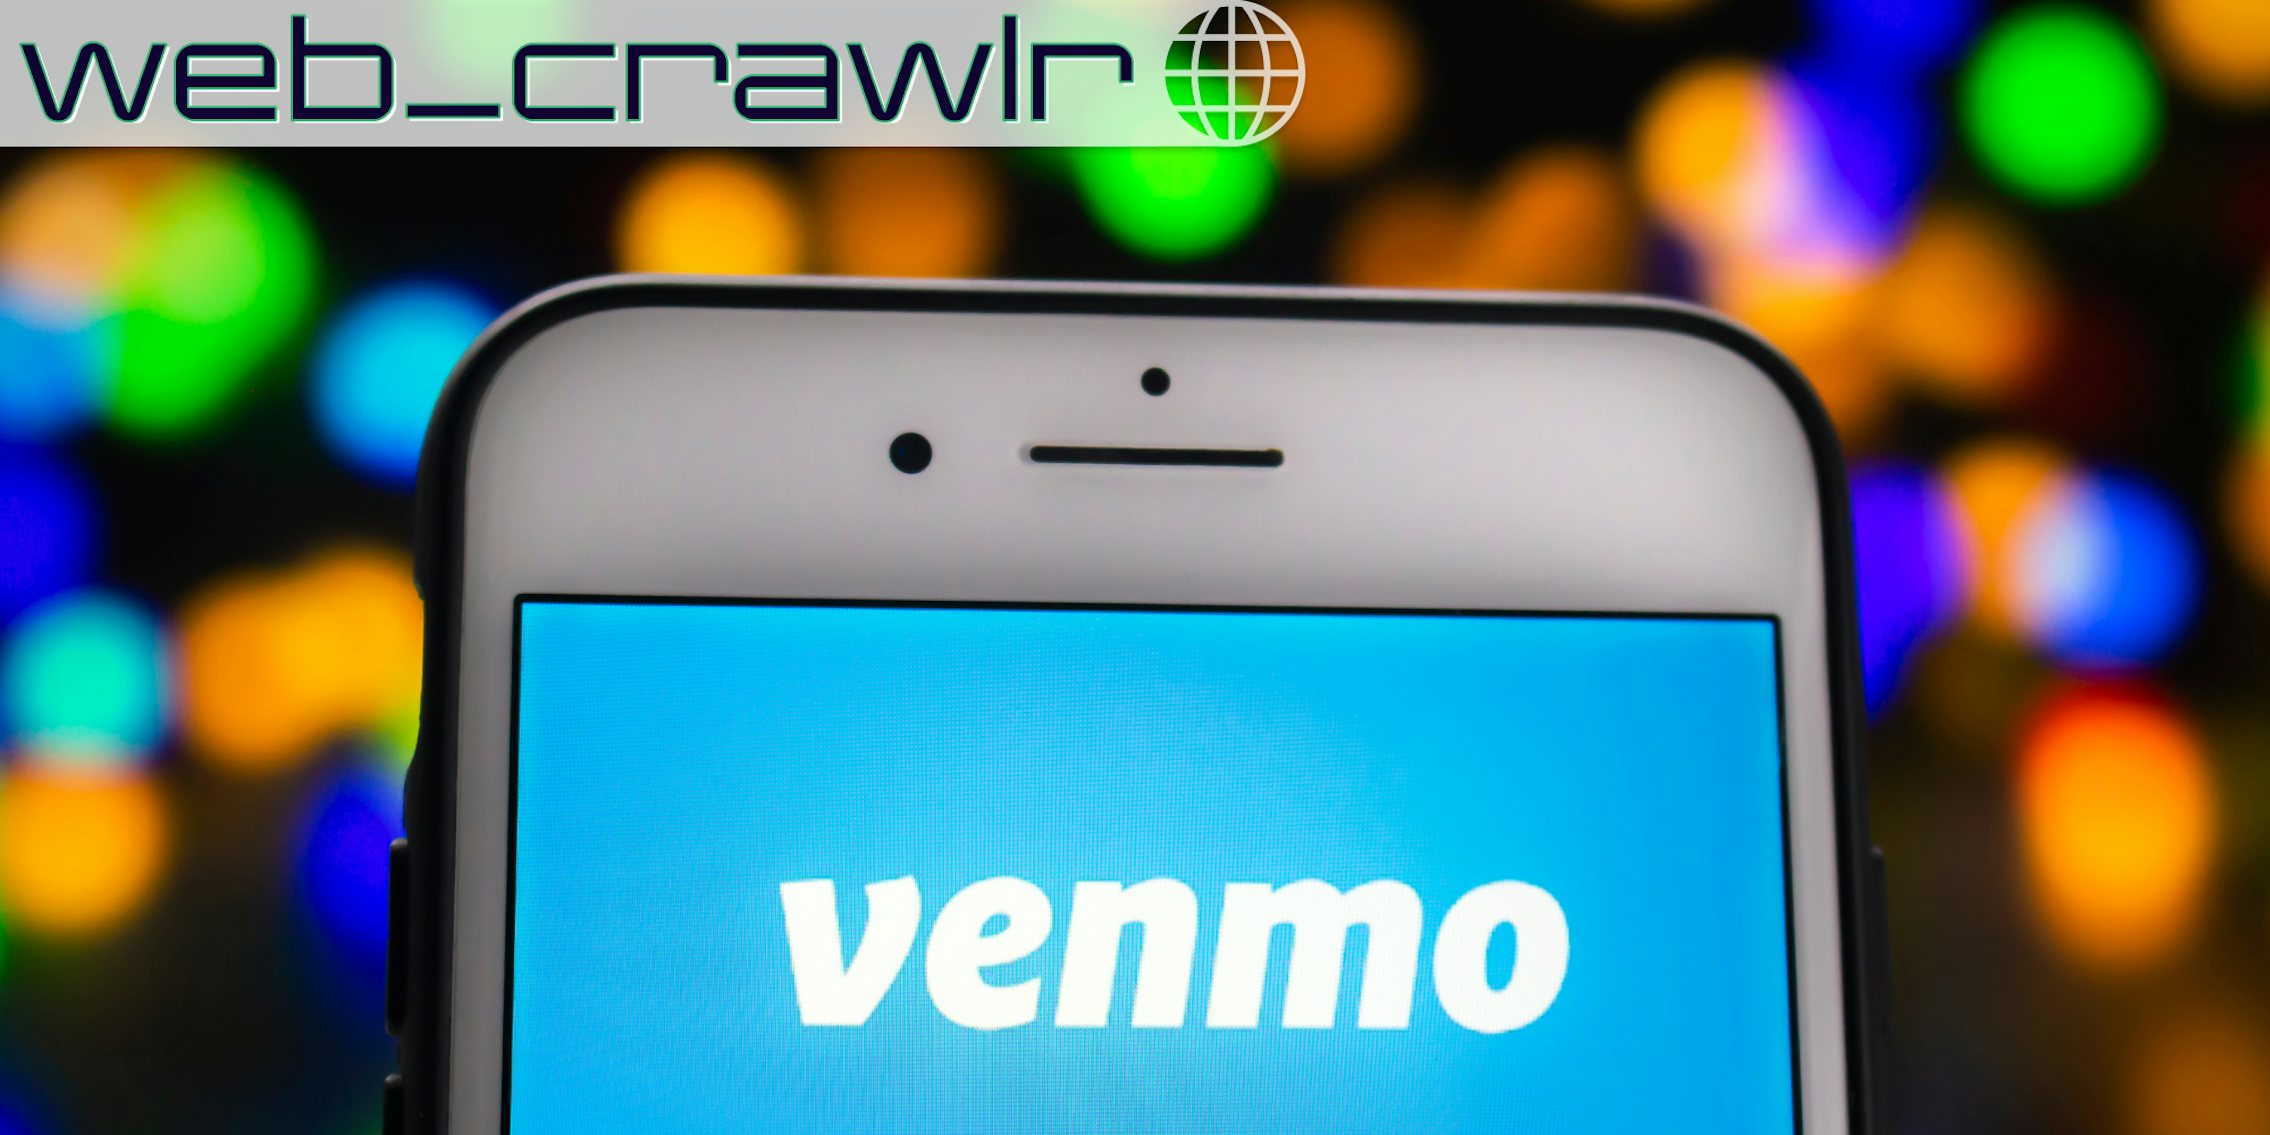 A phone with the Venmo logo on it. The Daily Dot newsletter web_crawlr logo is in the top left corner.